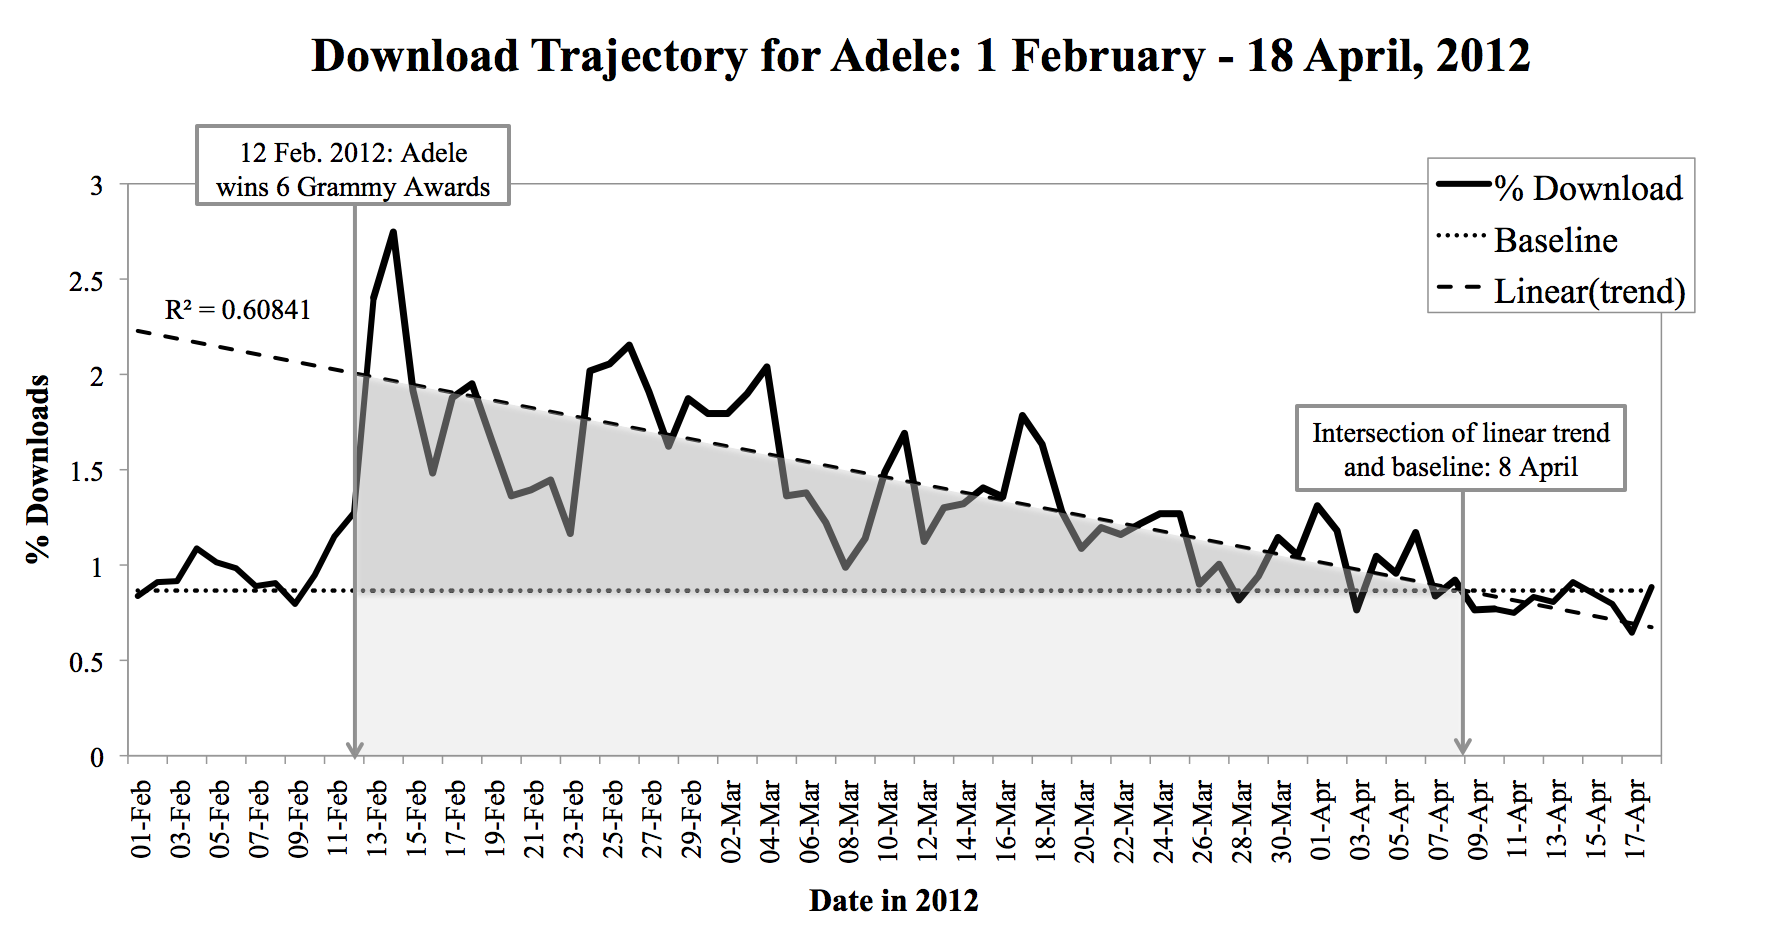 Download trajectory for Adele: 1 February18 April, 2012. Dark shaded area shows increase in downloading following Grammy Awards, 12 February 2012.